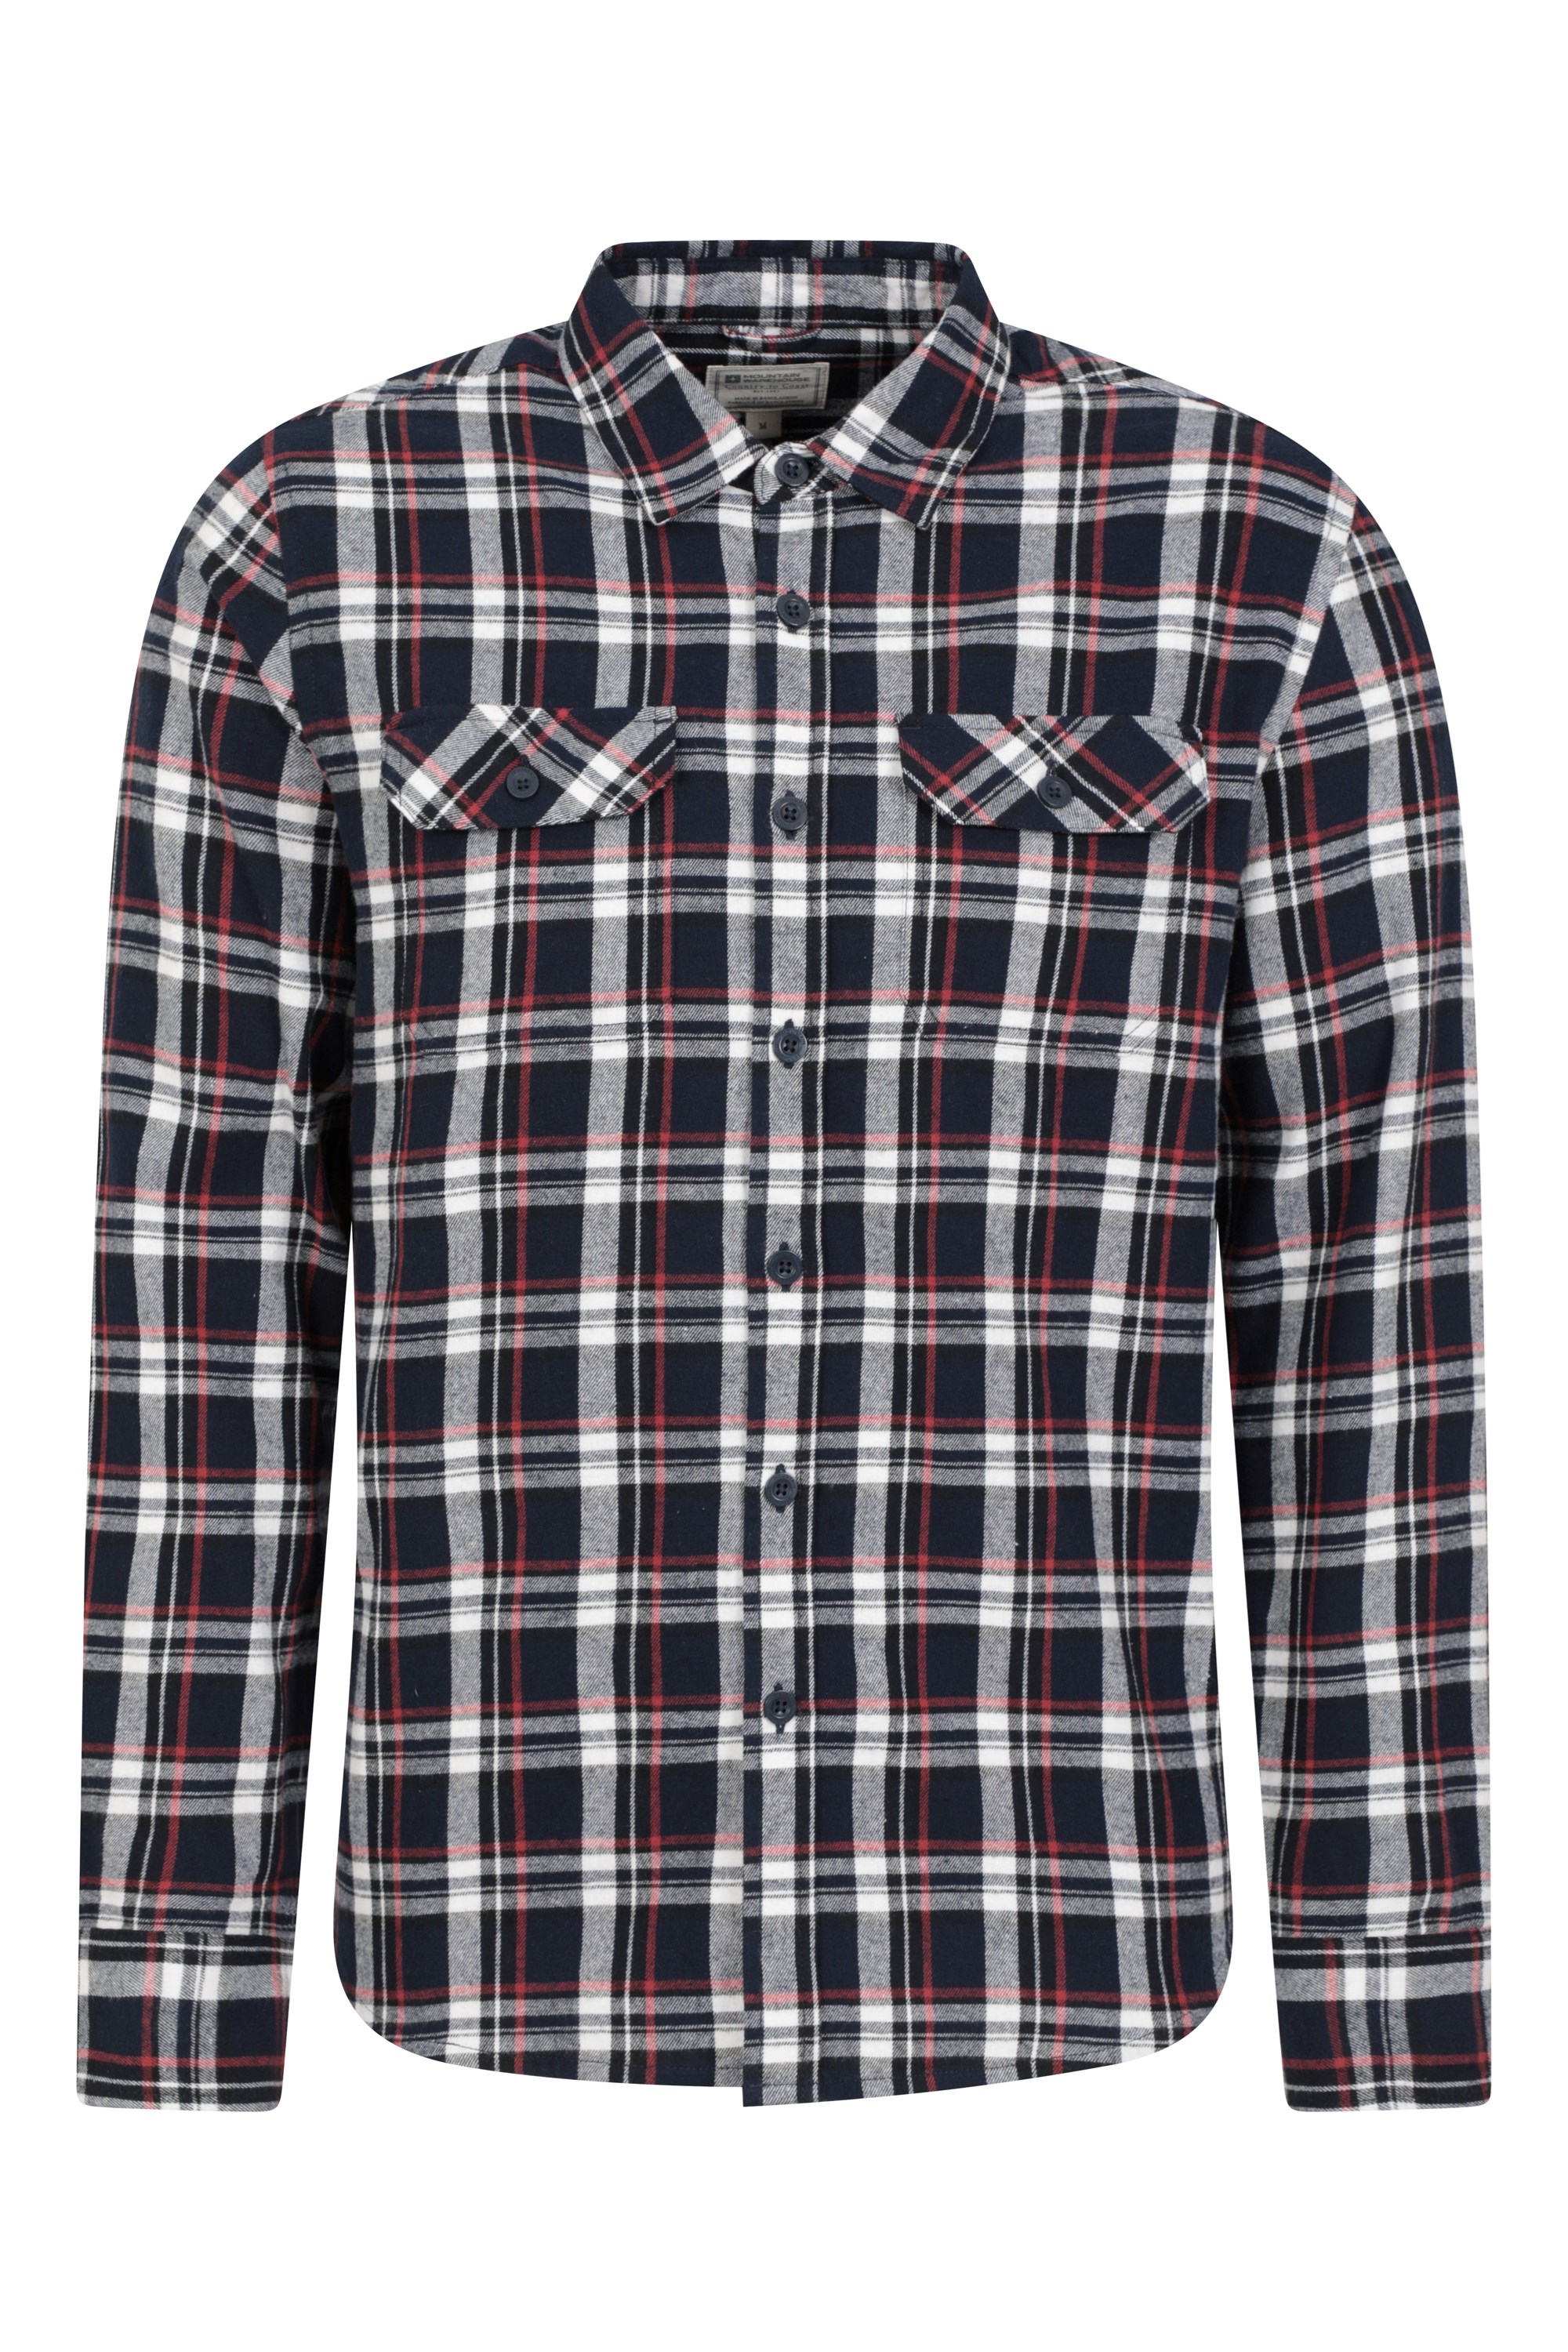 Trace Mens Flannel Long Sleeve Shirt - Blue